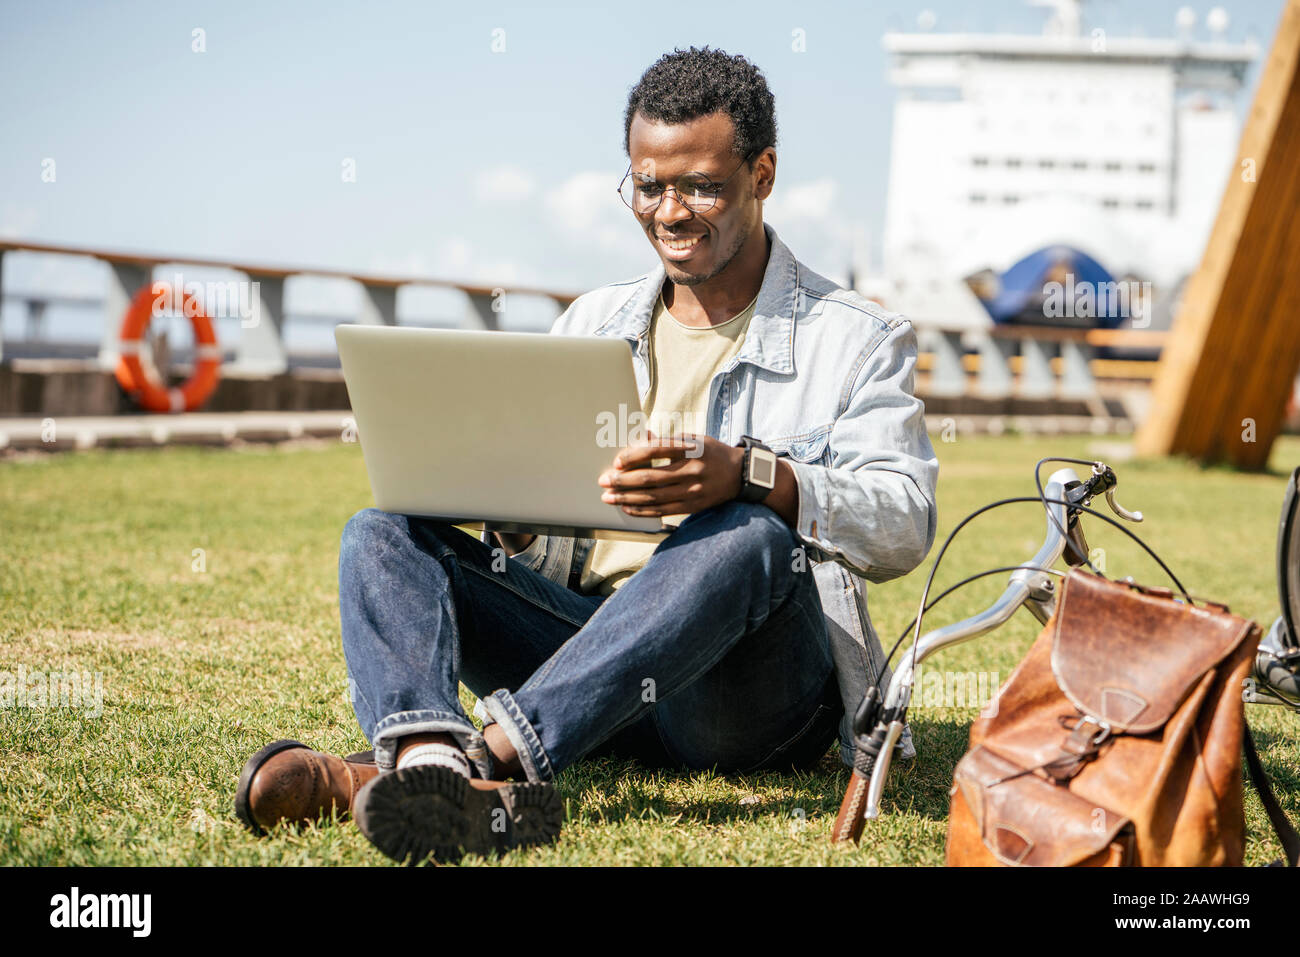 Young man sitting on grass, using laptop Banque D'Images